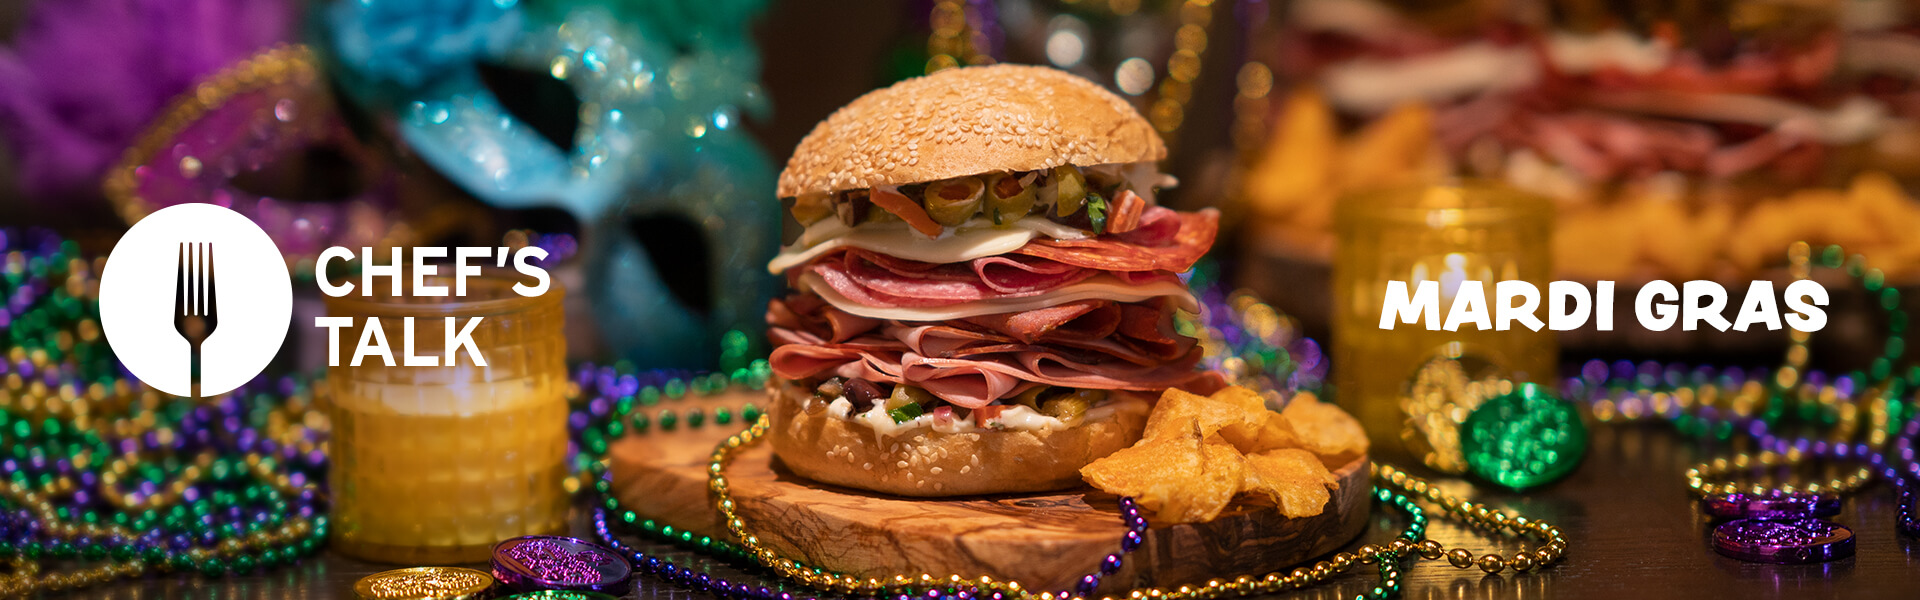 Food Marketing - Celebrate with the locals of Mardi Gras